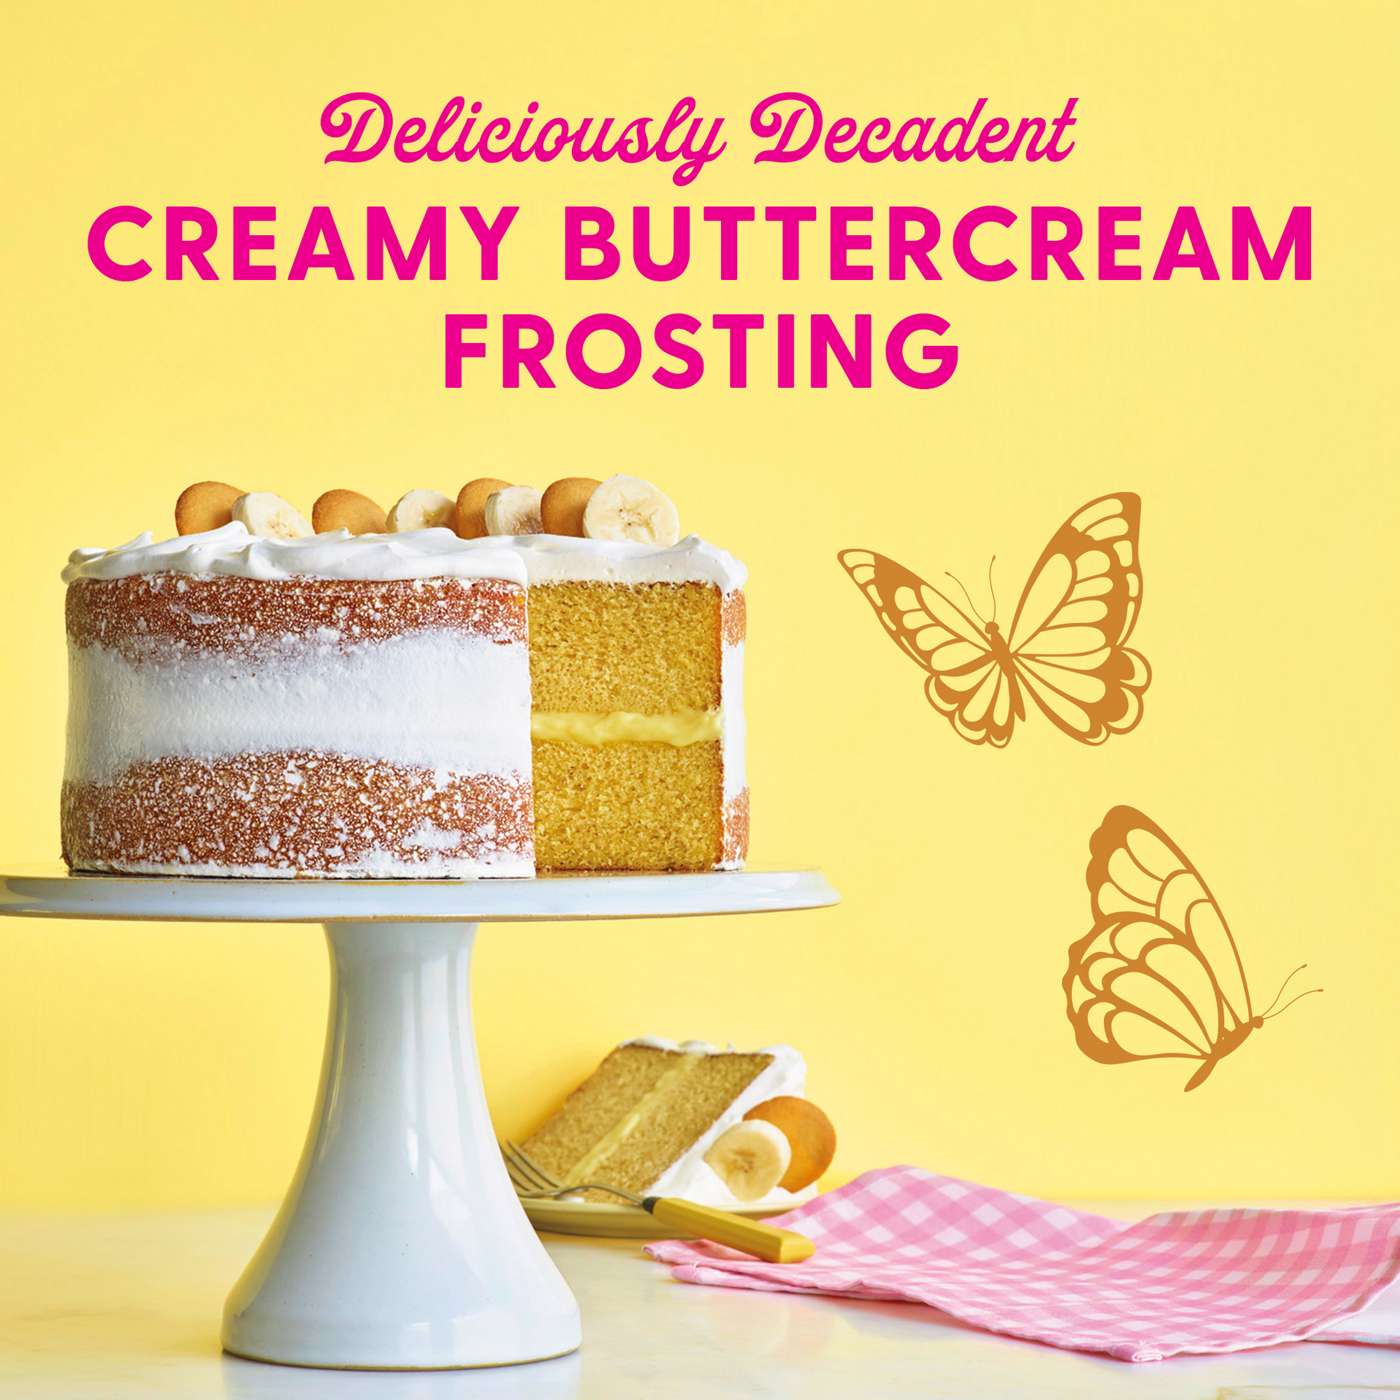 Duncan Hines Dolly Parton's Favorite Creamy Buttercream Flavored Cake Frosting; image 2 of 7